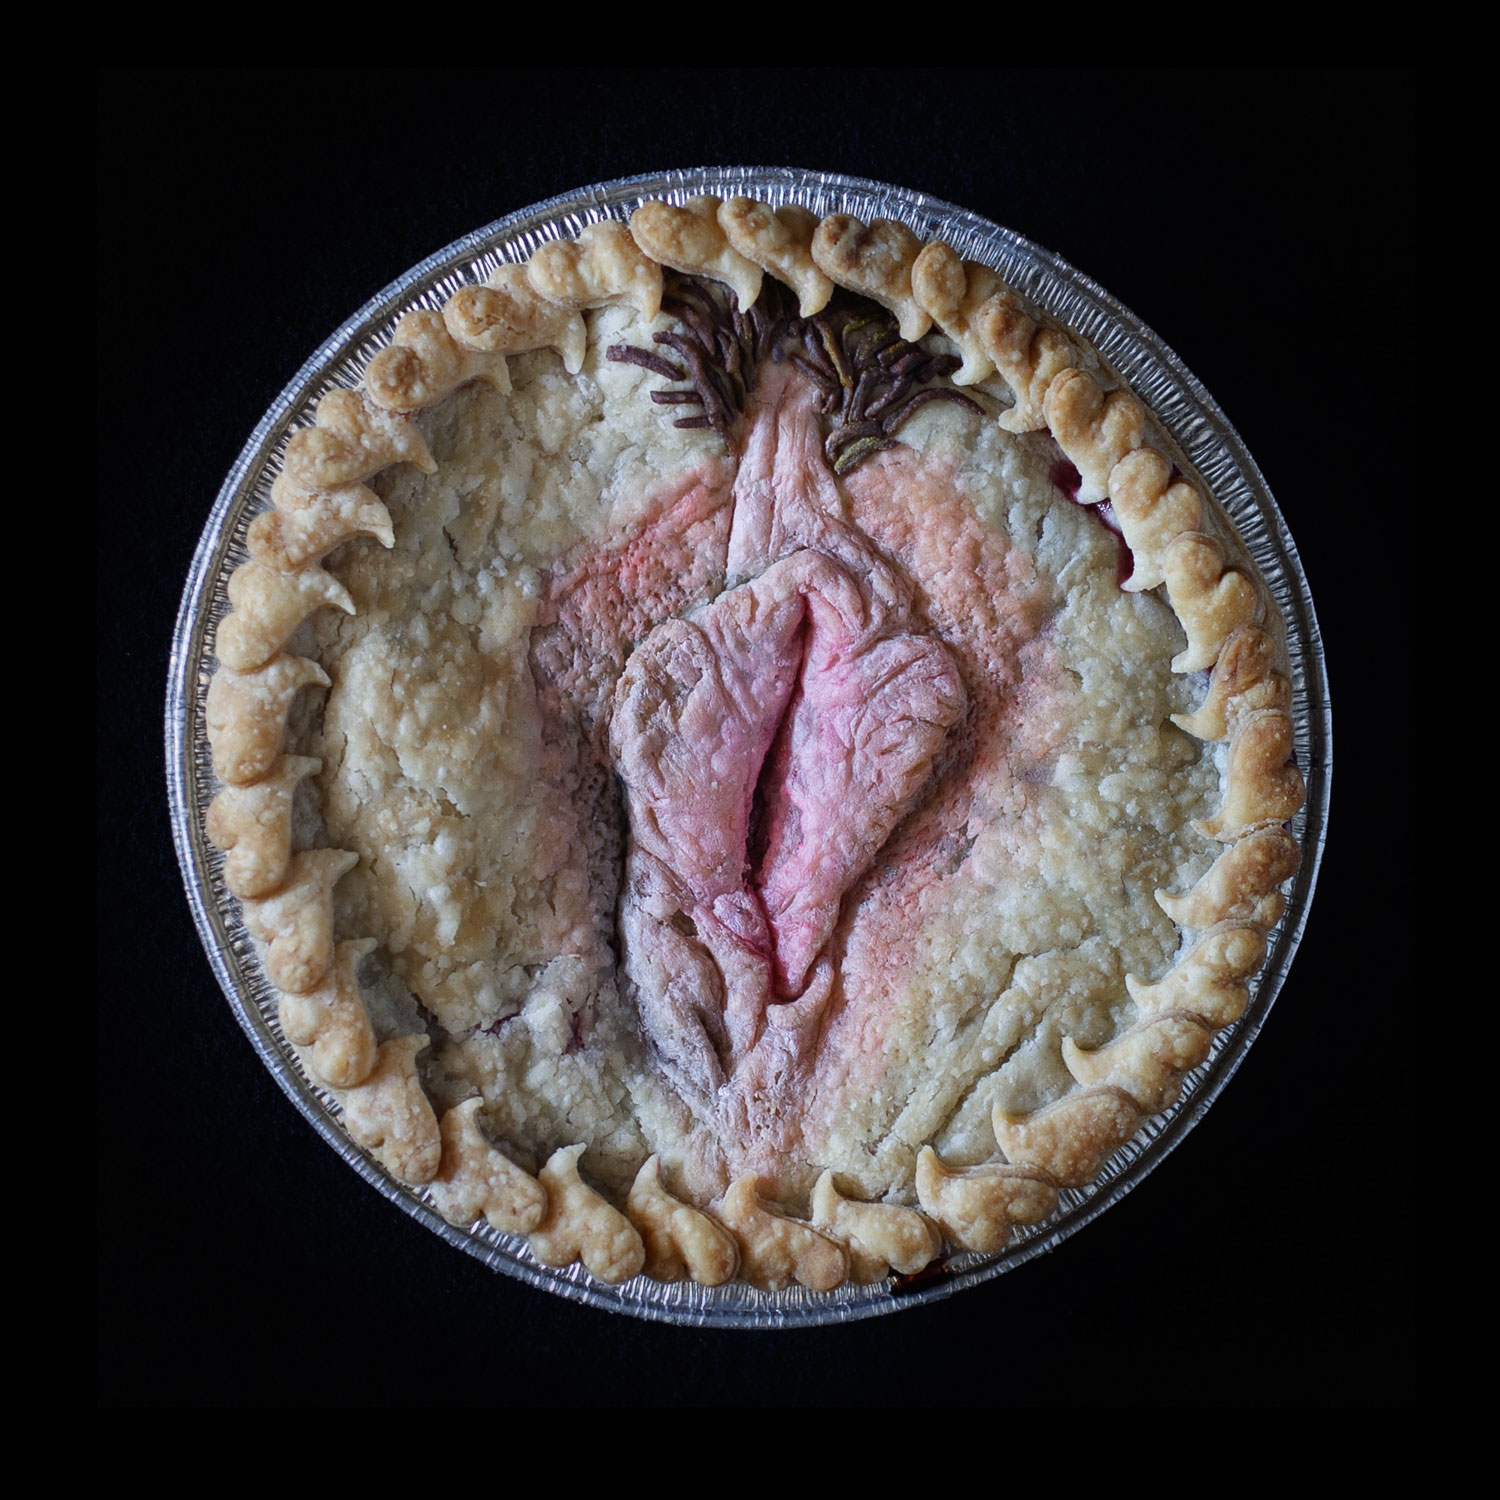 A baked pie on a black background. The pie is adorned with a realistic vulva surrounded my hearts cut out of pie dough. 